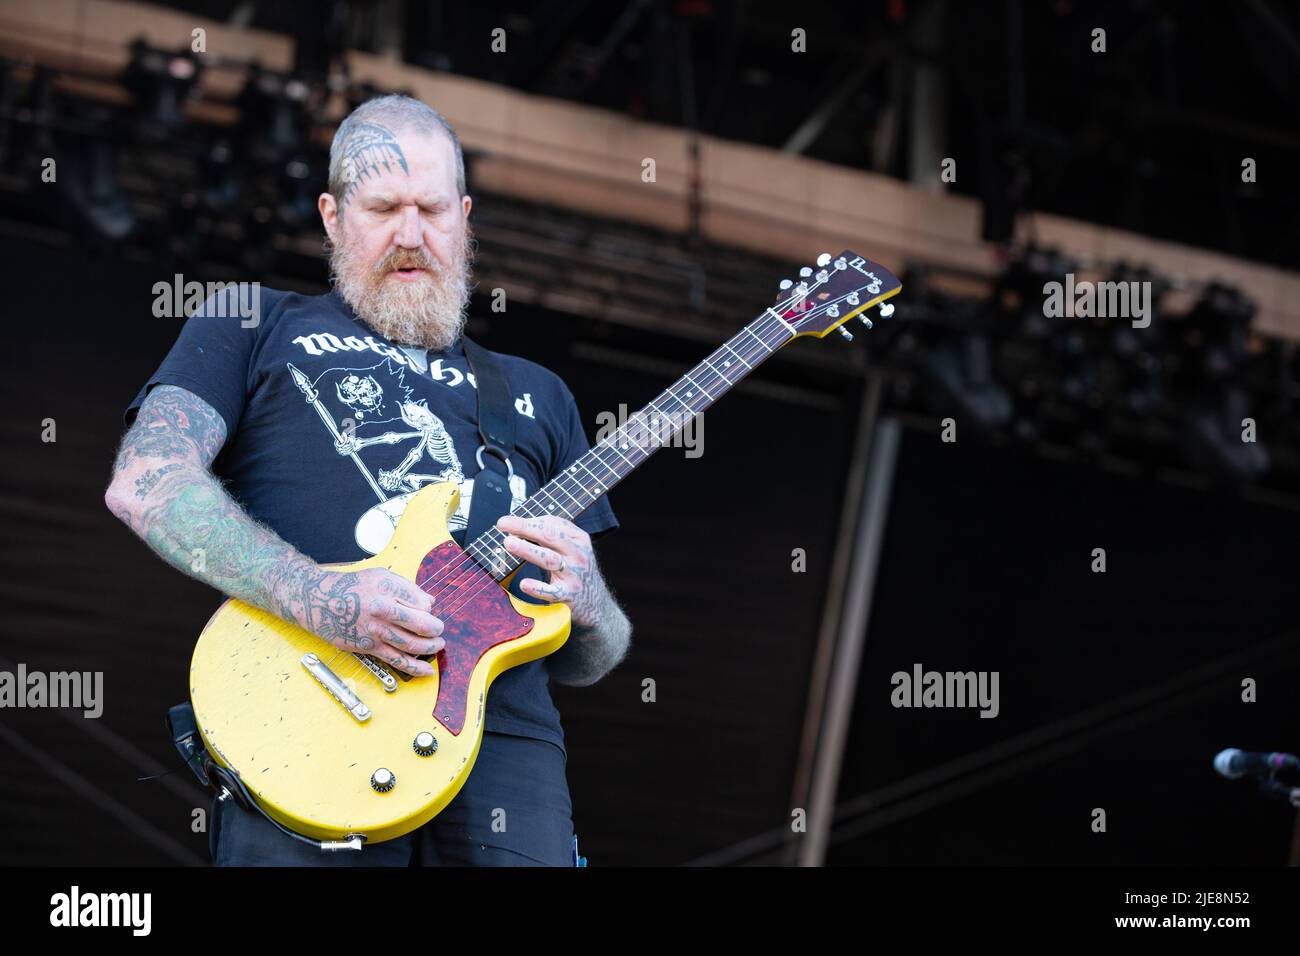 Oslo, Norway. 23rd, June 2022. The American metal band Mastodon performs a live concert during the Norwegian music festival Tons of Rock 2022 in Oslo. Here vocalist and guitarist Brent Hinds is seen live on stage. (Photo credit: Gonzales Photo - Per-Otto Oppi). Stock Photo